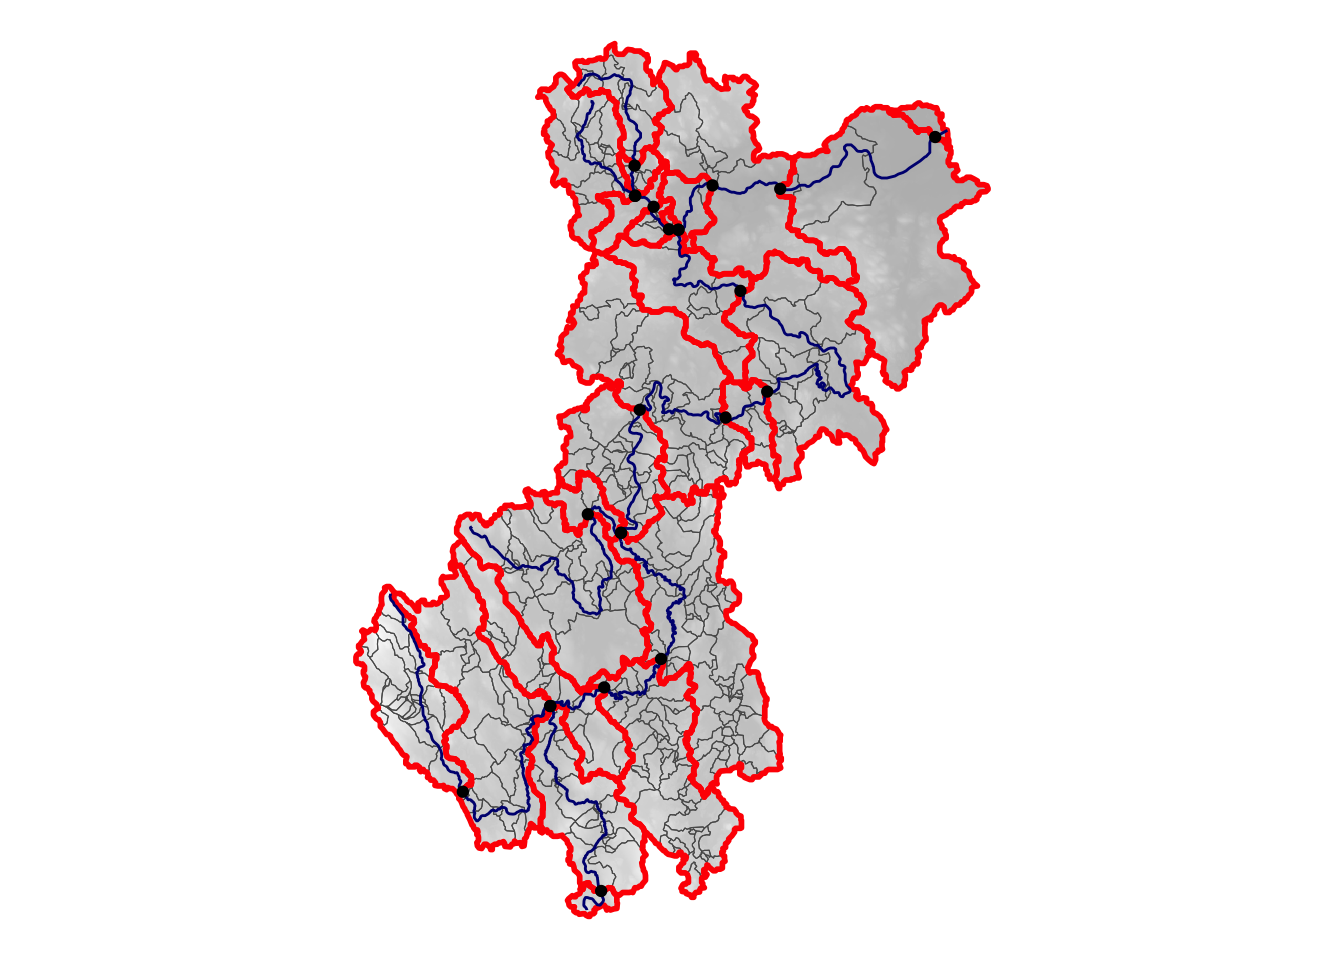 An idealized map showing catchment polygons with a connected network of rivers.